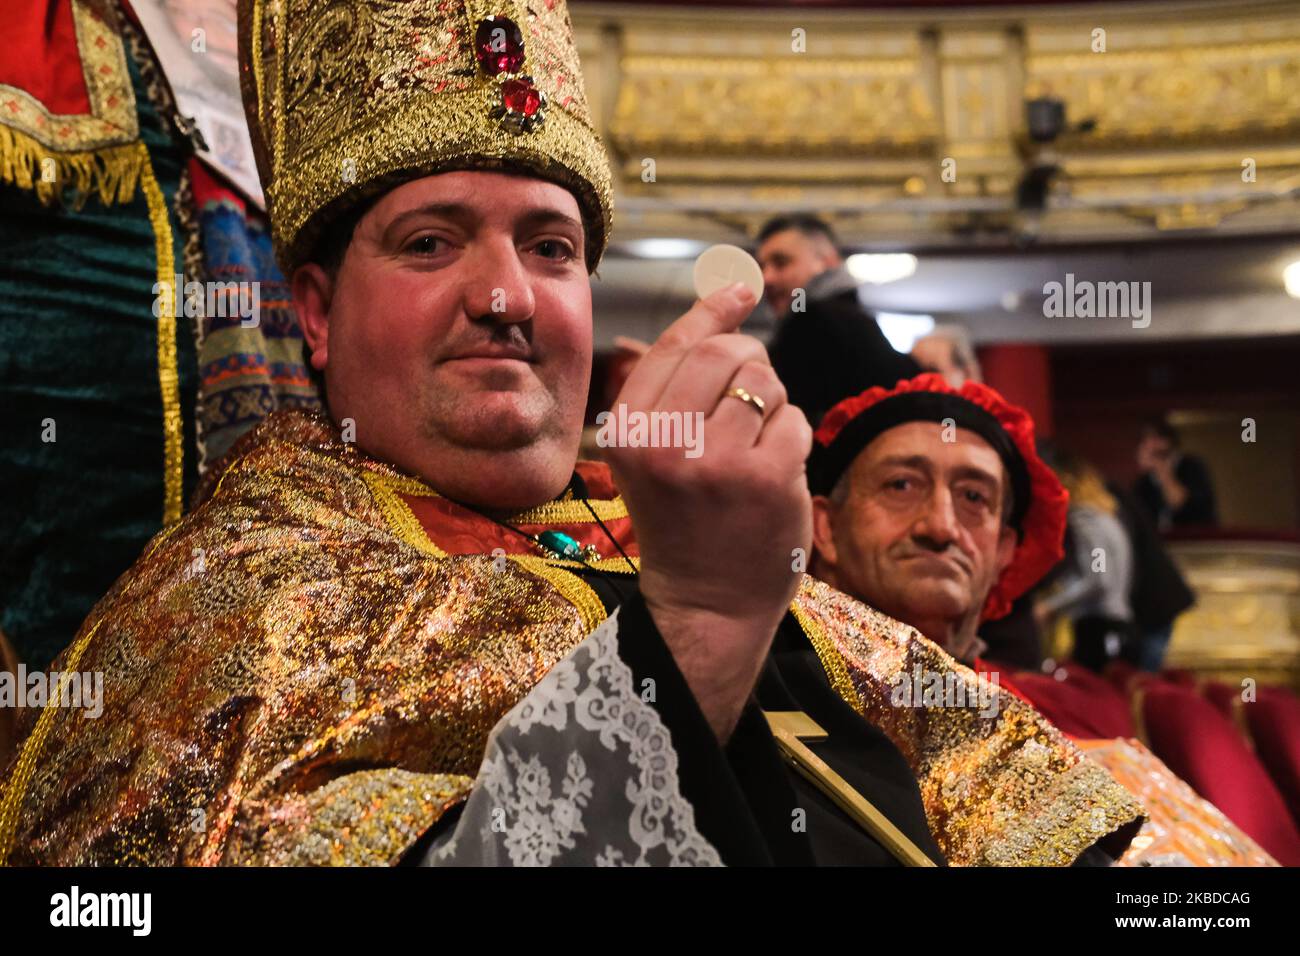 An spectator wearing a fancy dress attends to the draw of Spain's Christmas lottery named 'El Gordo' (Fat One) at the Teatro Real on December 22, 2019 in Madrid, Spain. This year's winning number is 26590, with a total of 4 million euros for the top prize to be shared between ten ticket holders. (Photo by Antonio Navia/NurPhoto) Stock Photo